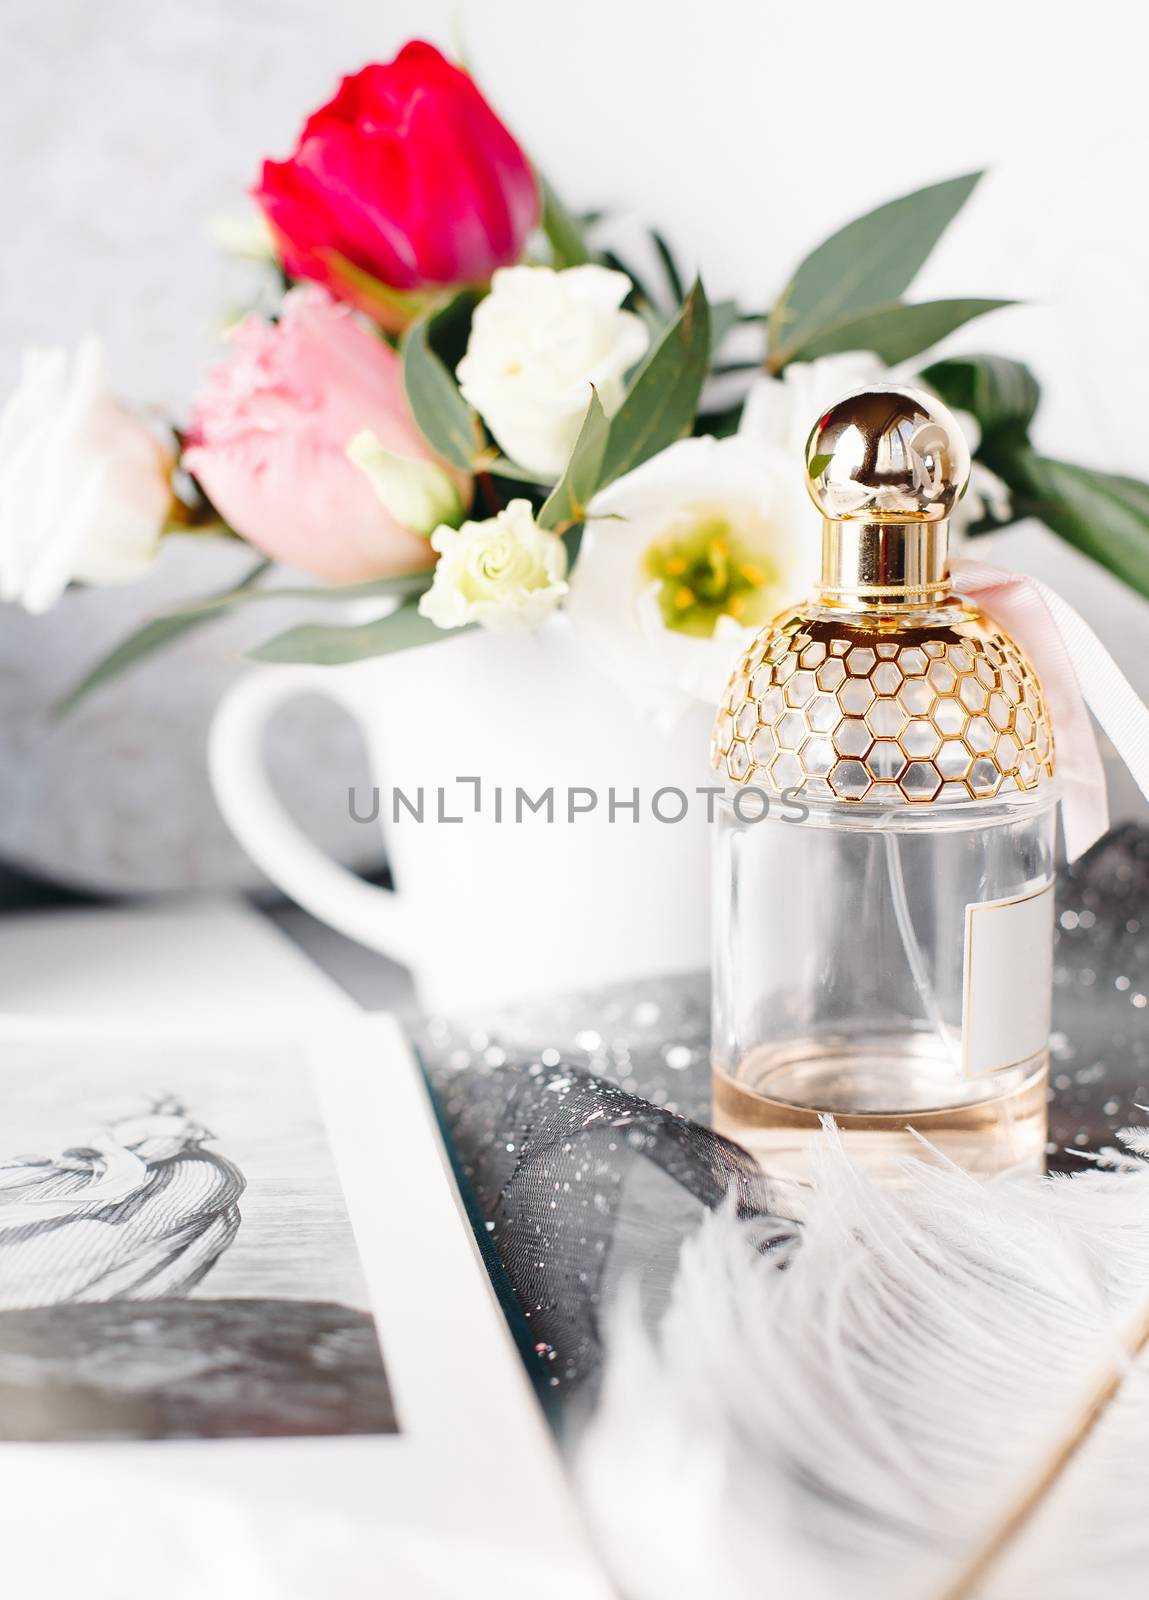 Bottle of perfume. Spring bouquet on gray concrete table. Roses, tulips and lisianthus. White feather. by Denys_N